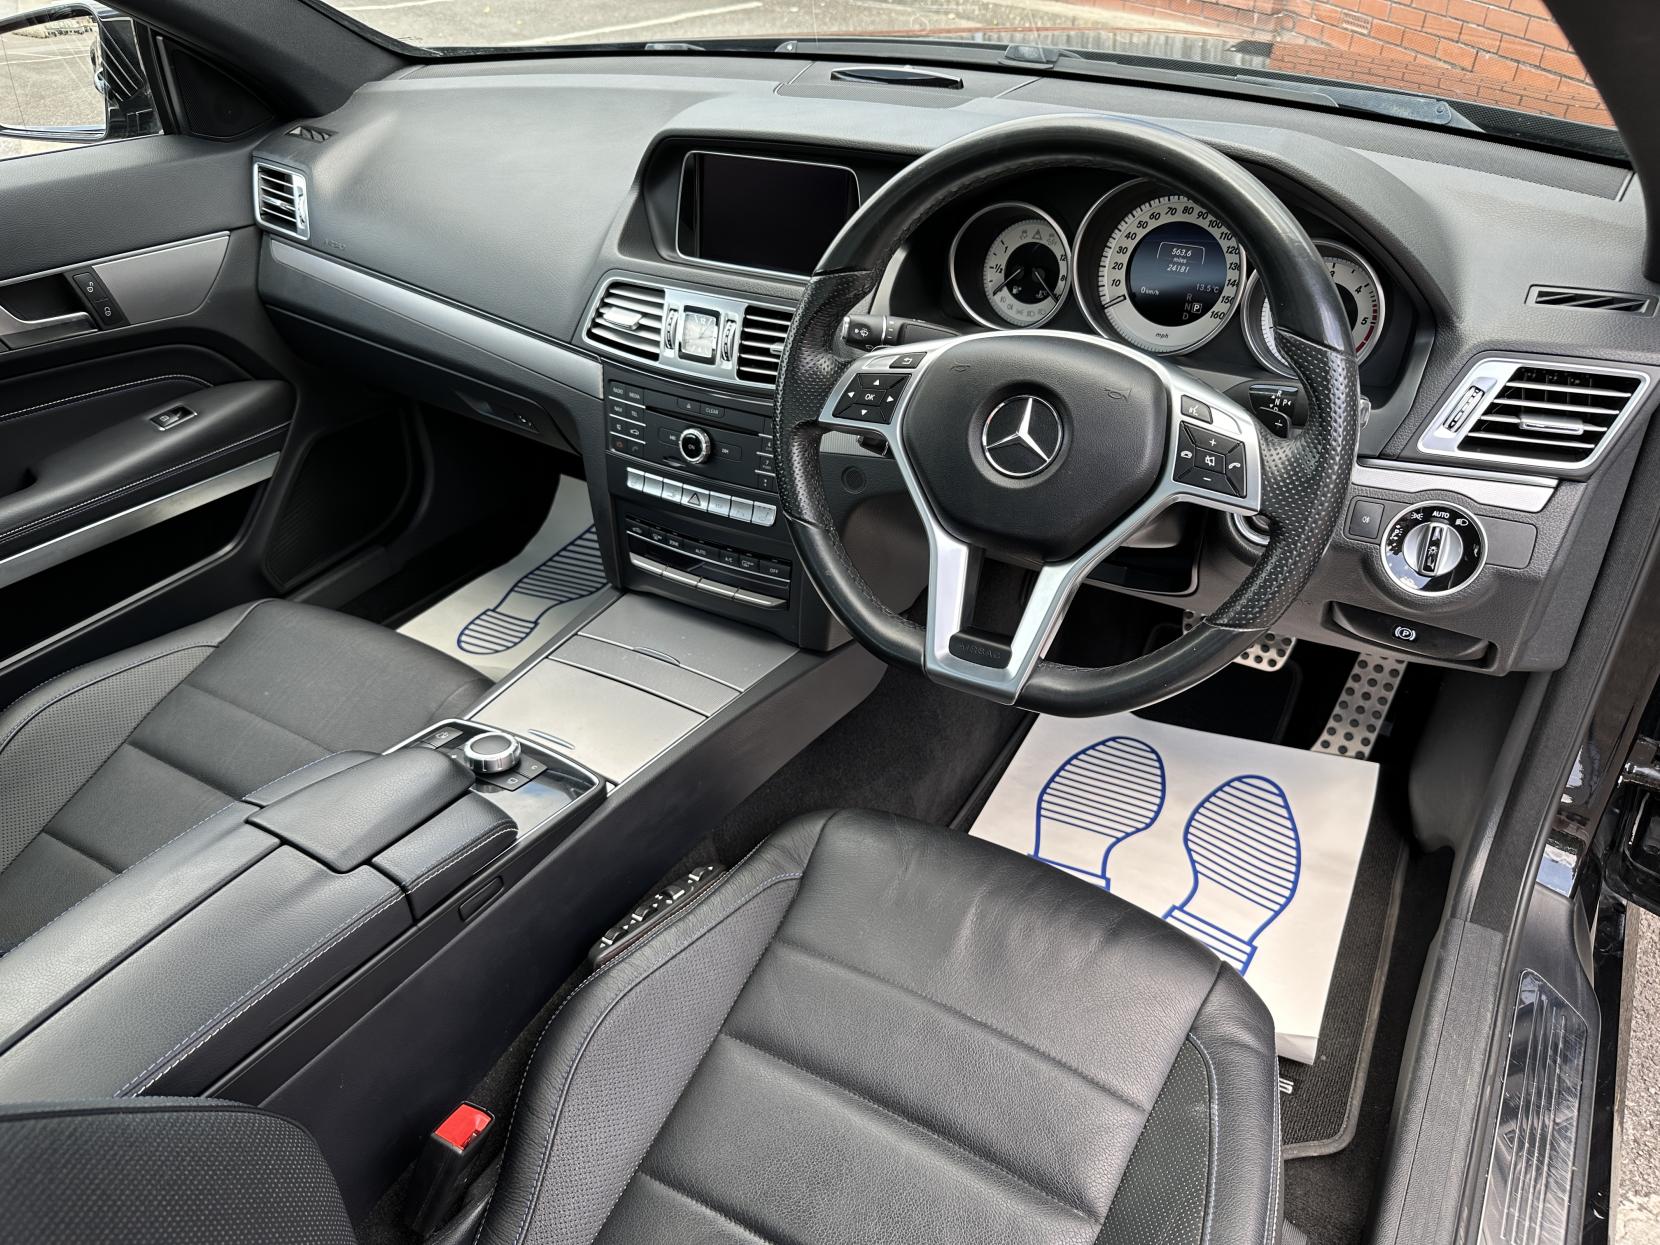 Mercedes-Benz E Class 3.0 E350d V6 AMG Line Edition Coupe 2dr Diesel G-Tronic+ Euro 6 (s/s) (258 ps)